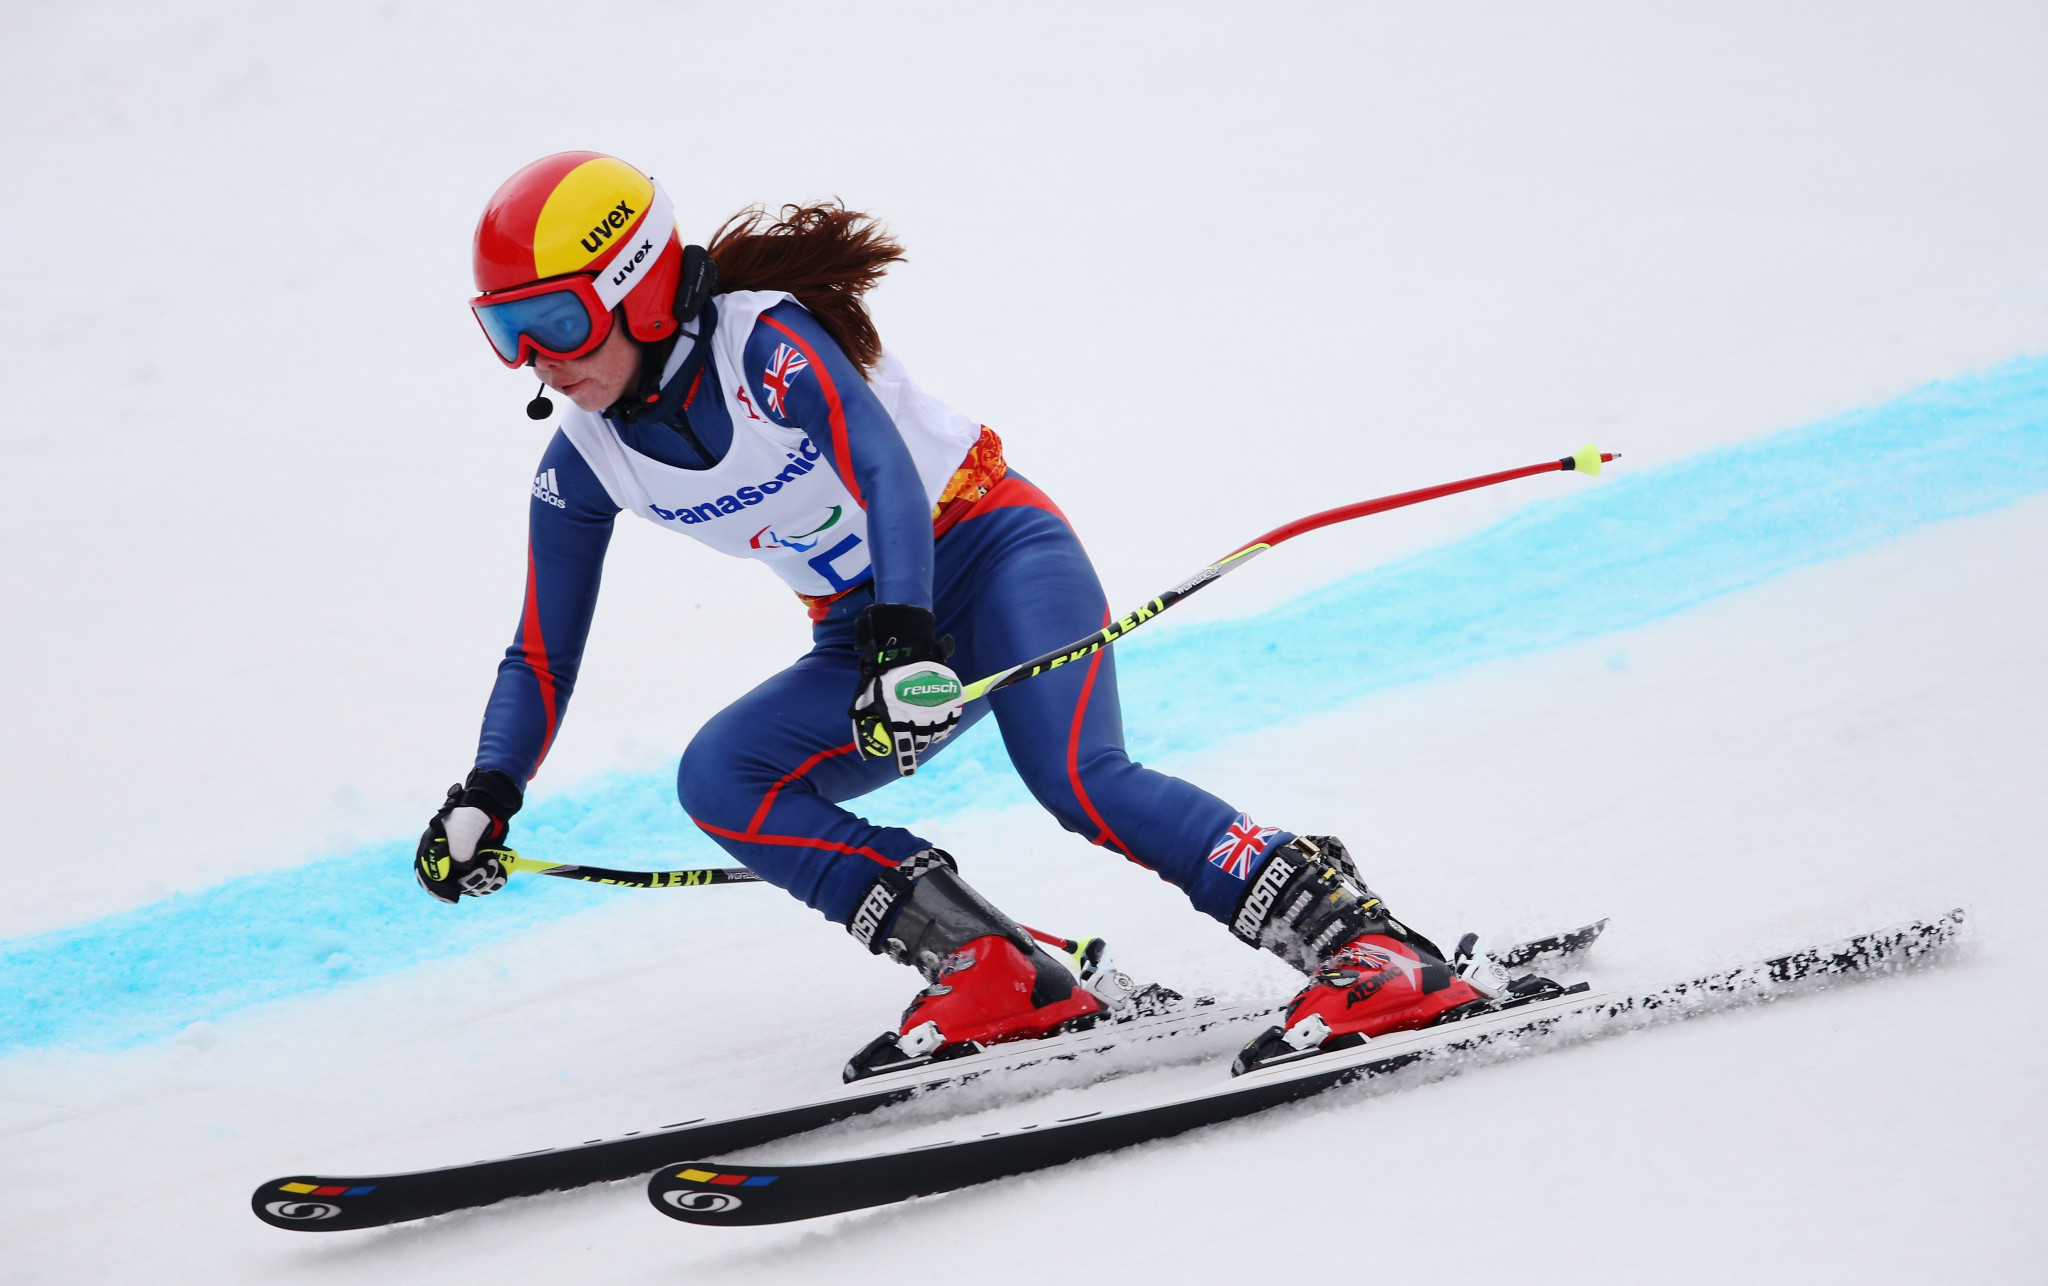 Jade Etherington, who won four medals in Para-Alpine skiing at Sochi 2014, is among the former athletes to have benefited from the Paralympic Inspiration Programme ©Getty Images